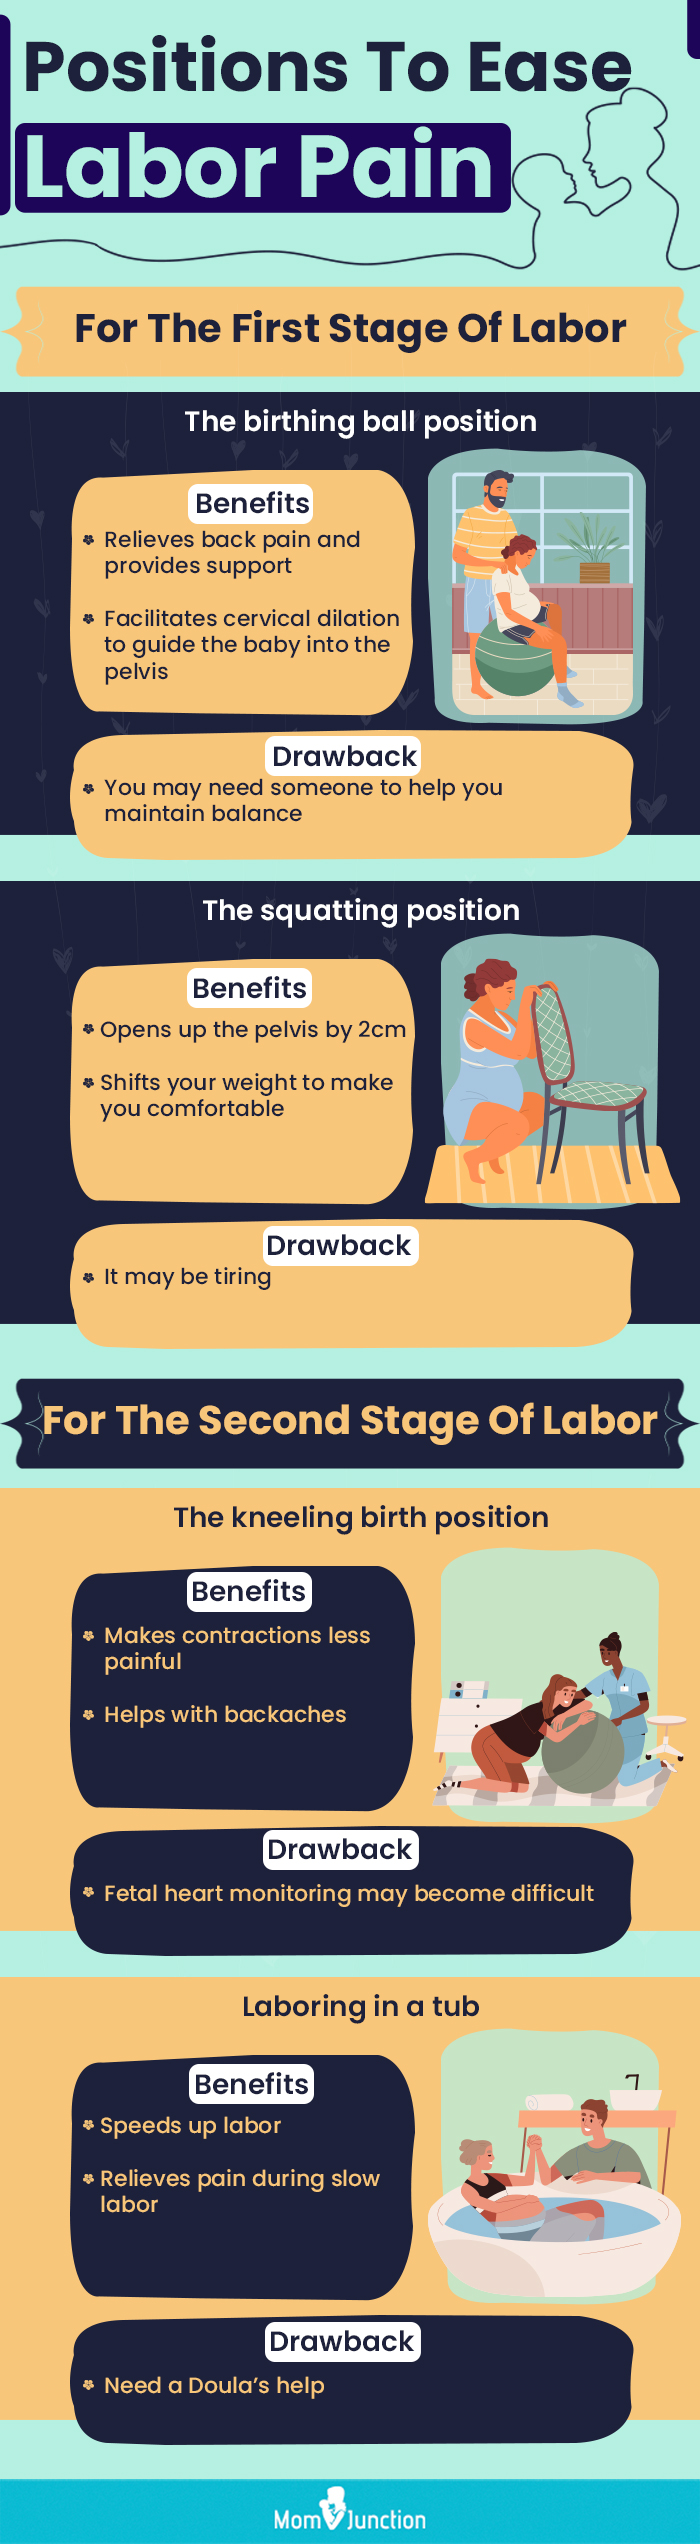 positions to ease labour pain (infographic)